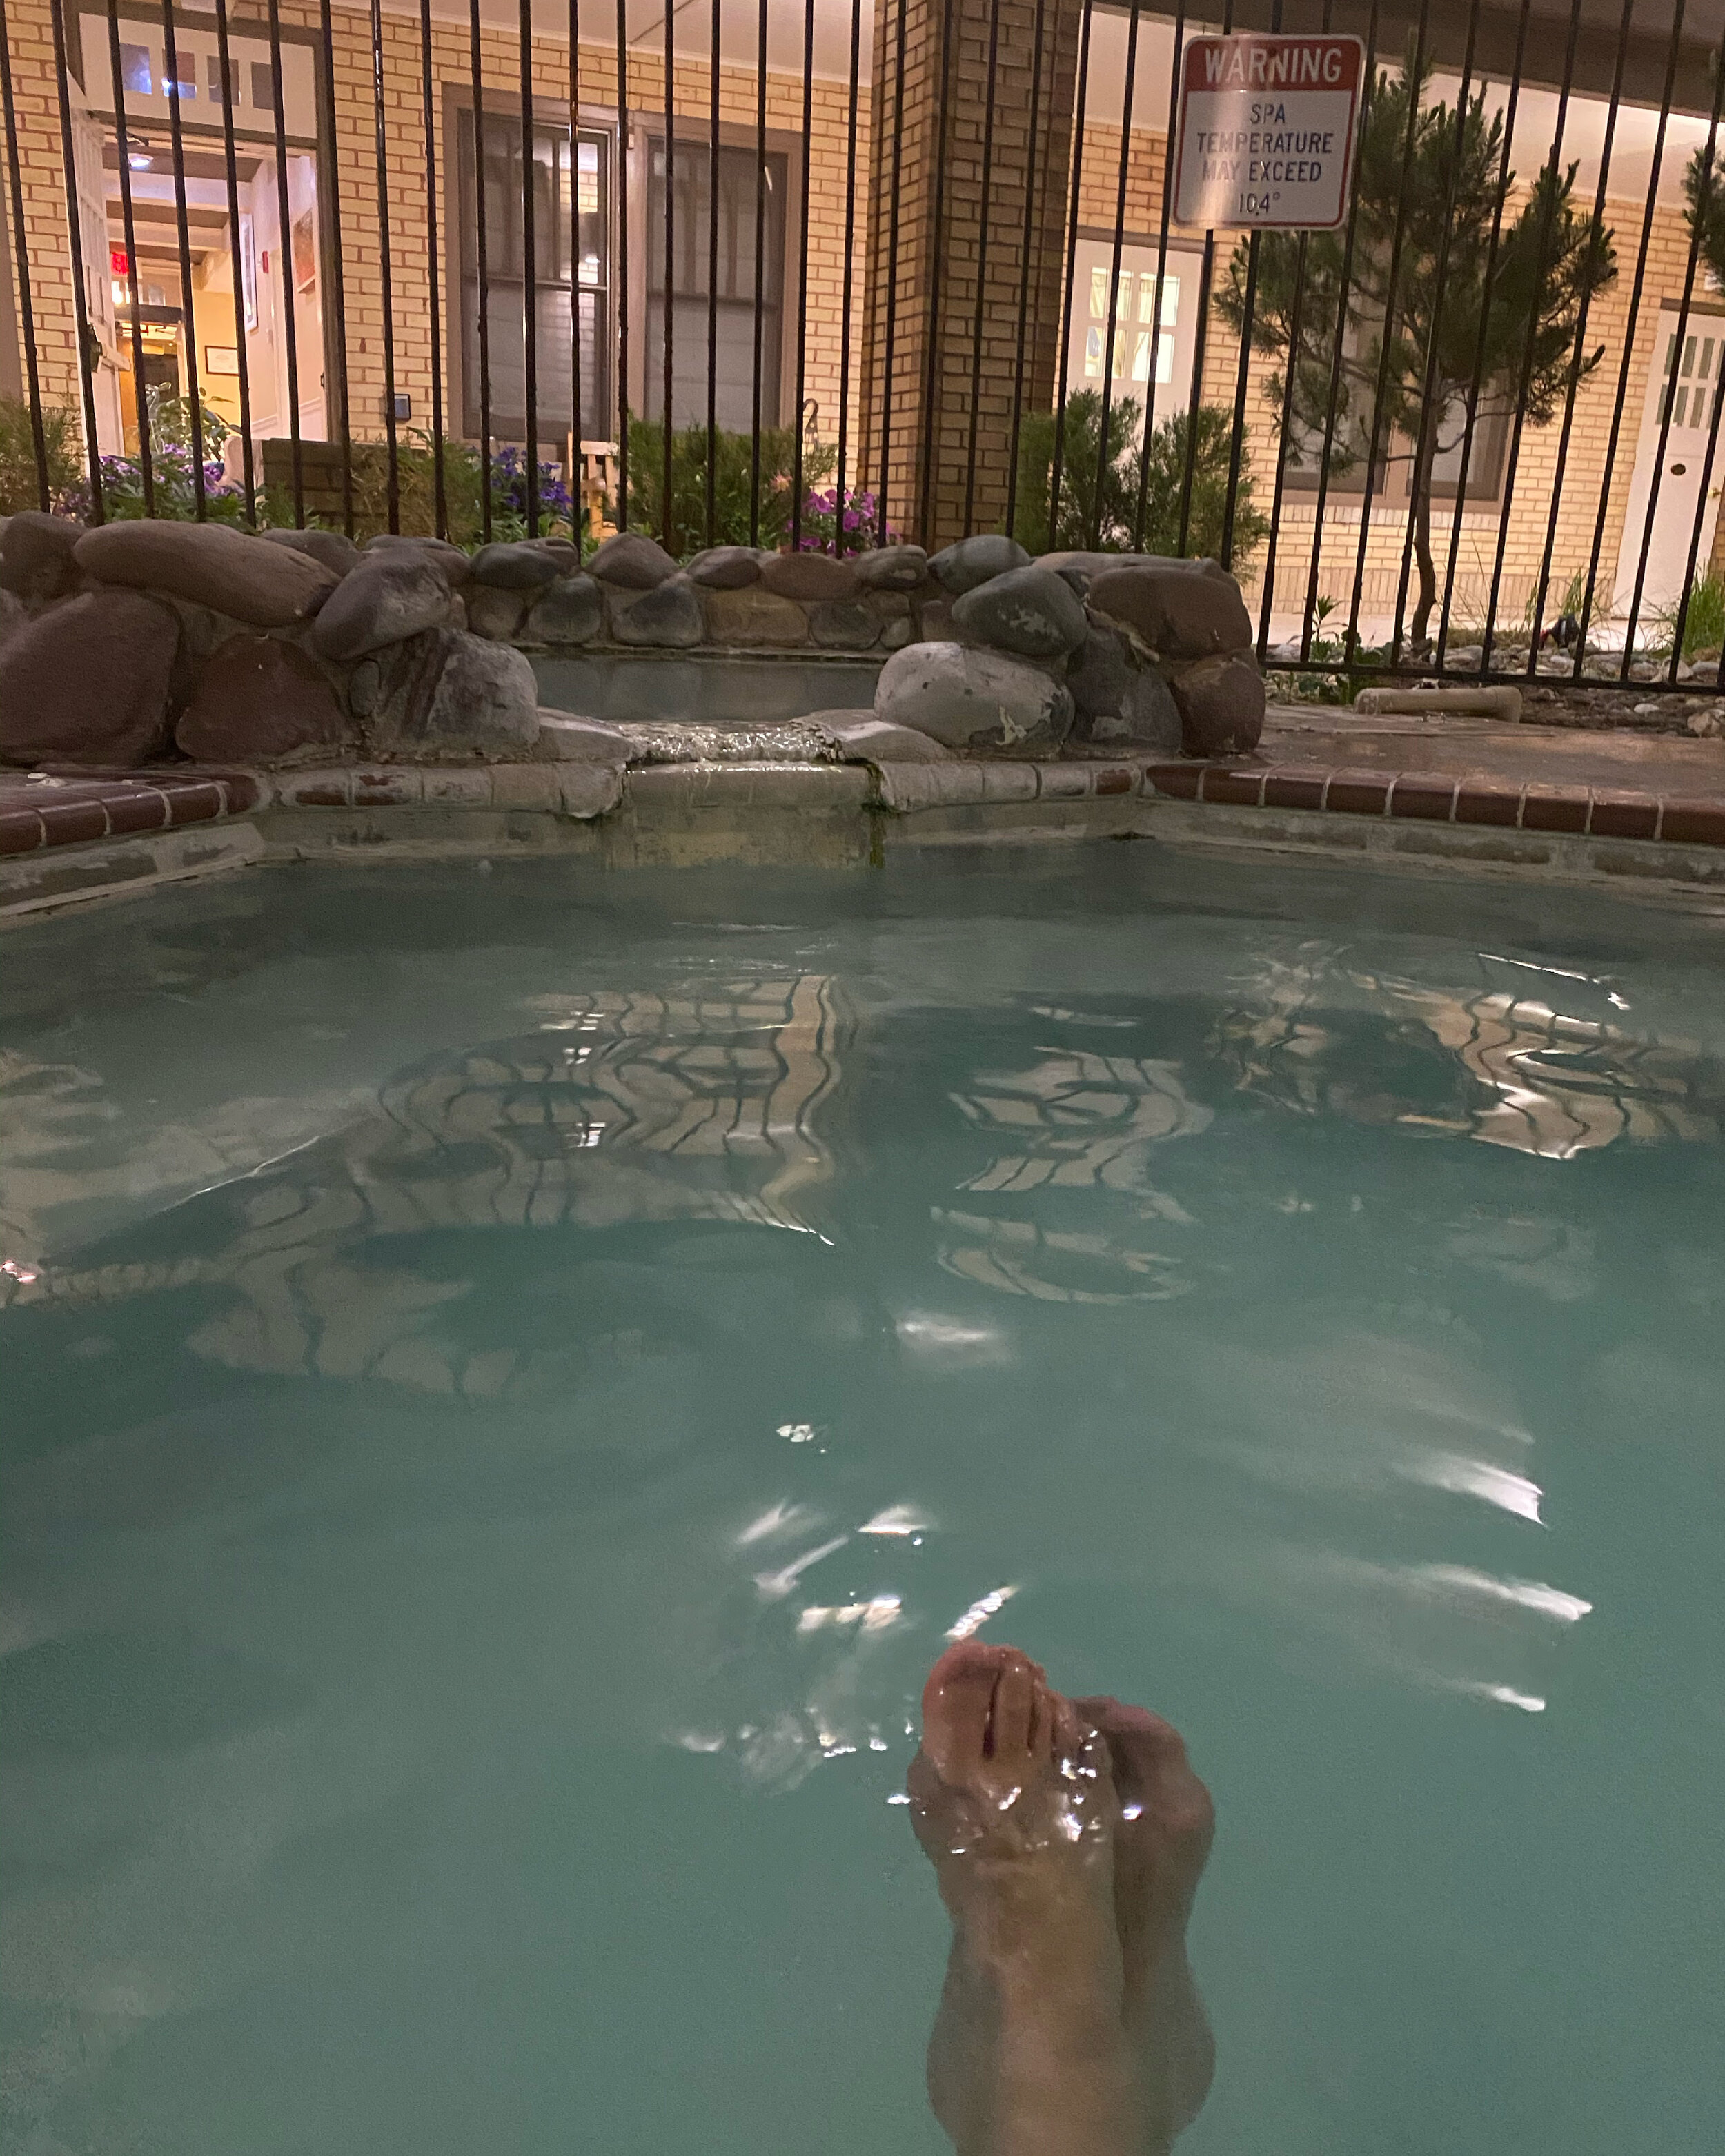 Relaxing in the Mineral Hot Spring at the Best Western Plaza Hotel.  Photo by Karen Boudreaux, May 28, 2021